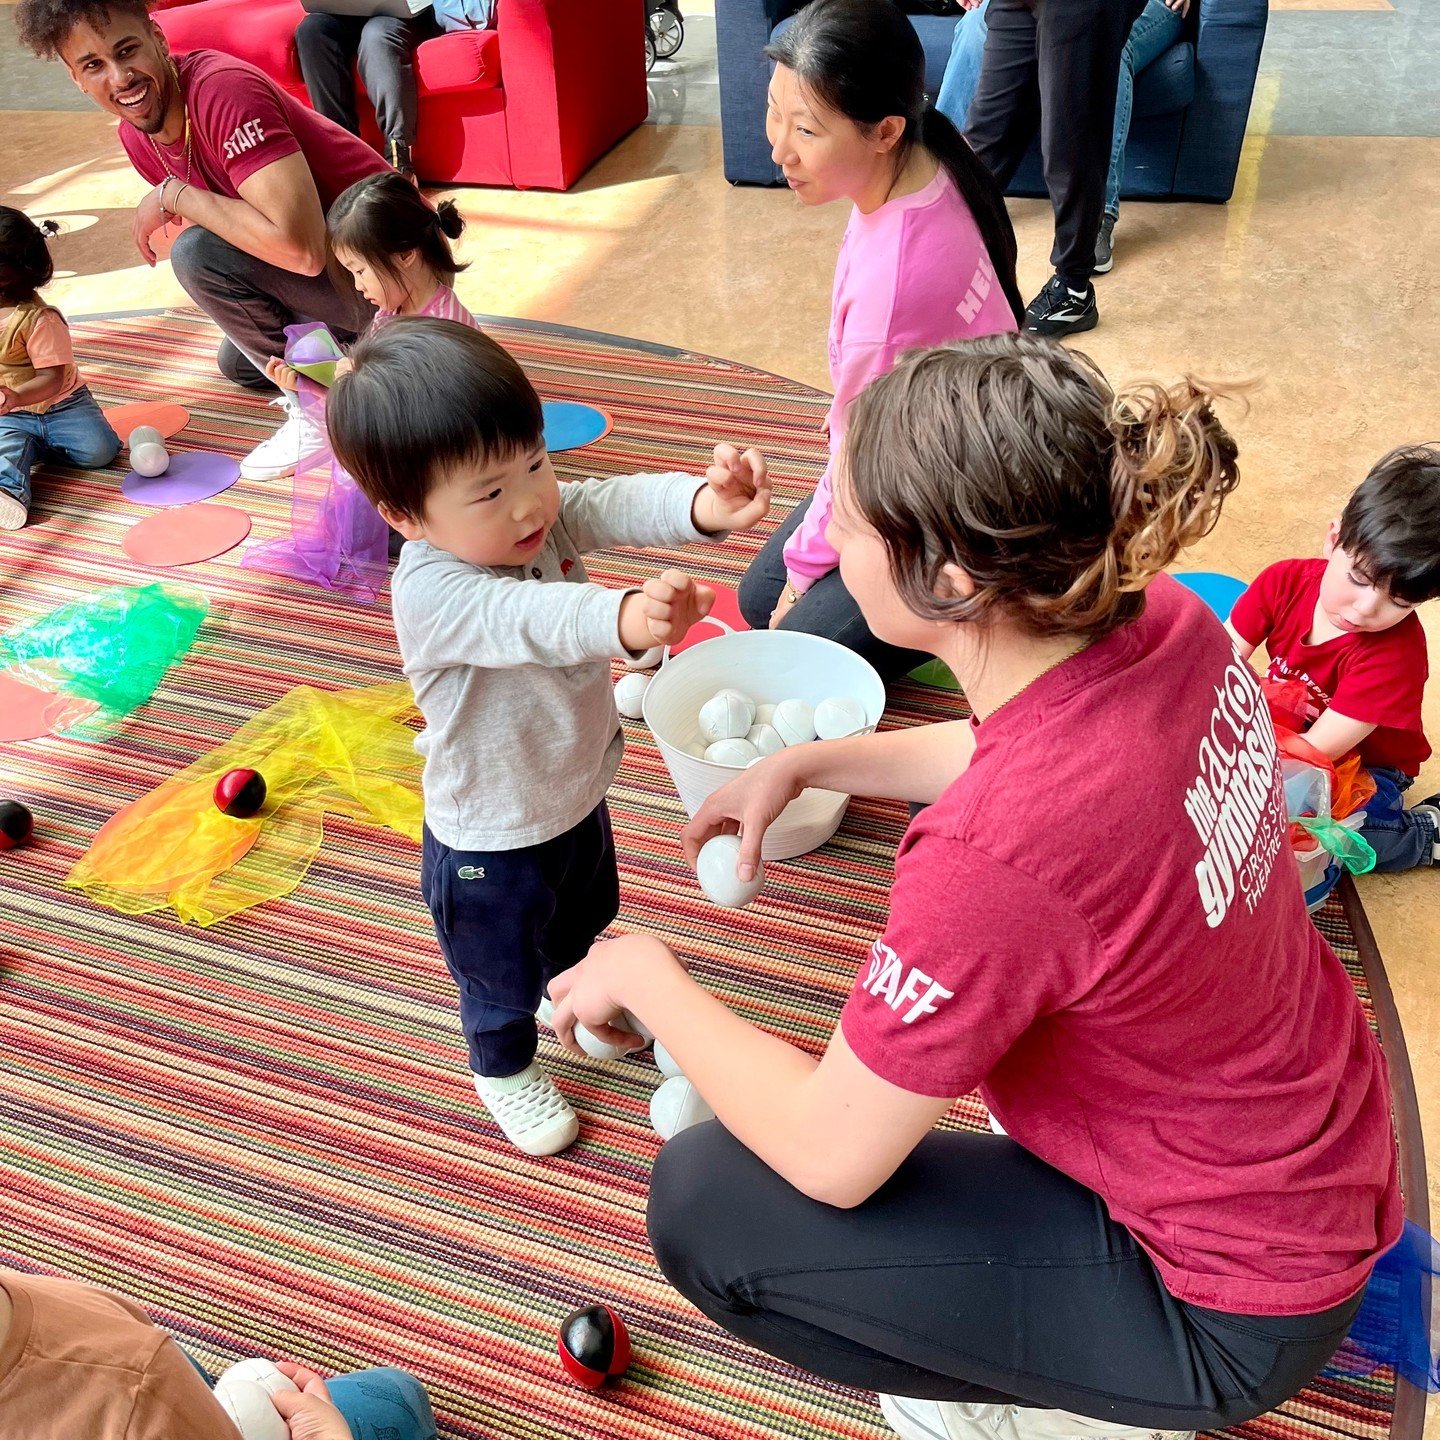 It's been almost a week since we wrapped up Spring Break Play Days and we can't believe it! Chicago Children's Museum welcomed more than 25,000 visitors, including guests from 🗺️ 40 states and 10 different countries outside of the U.S.! More than 2,